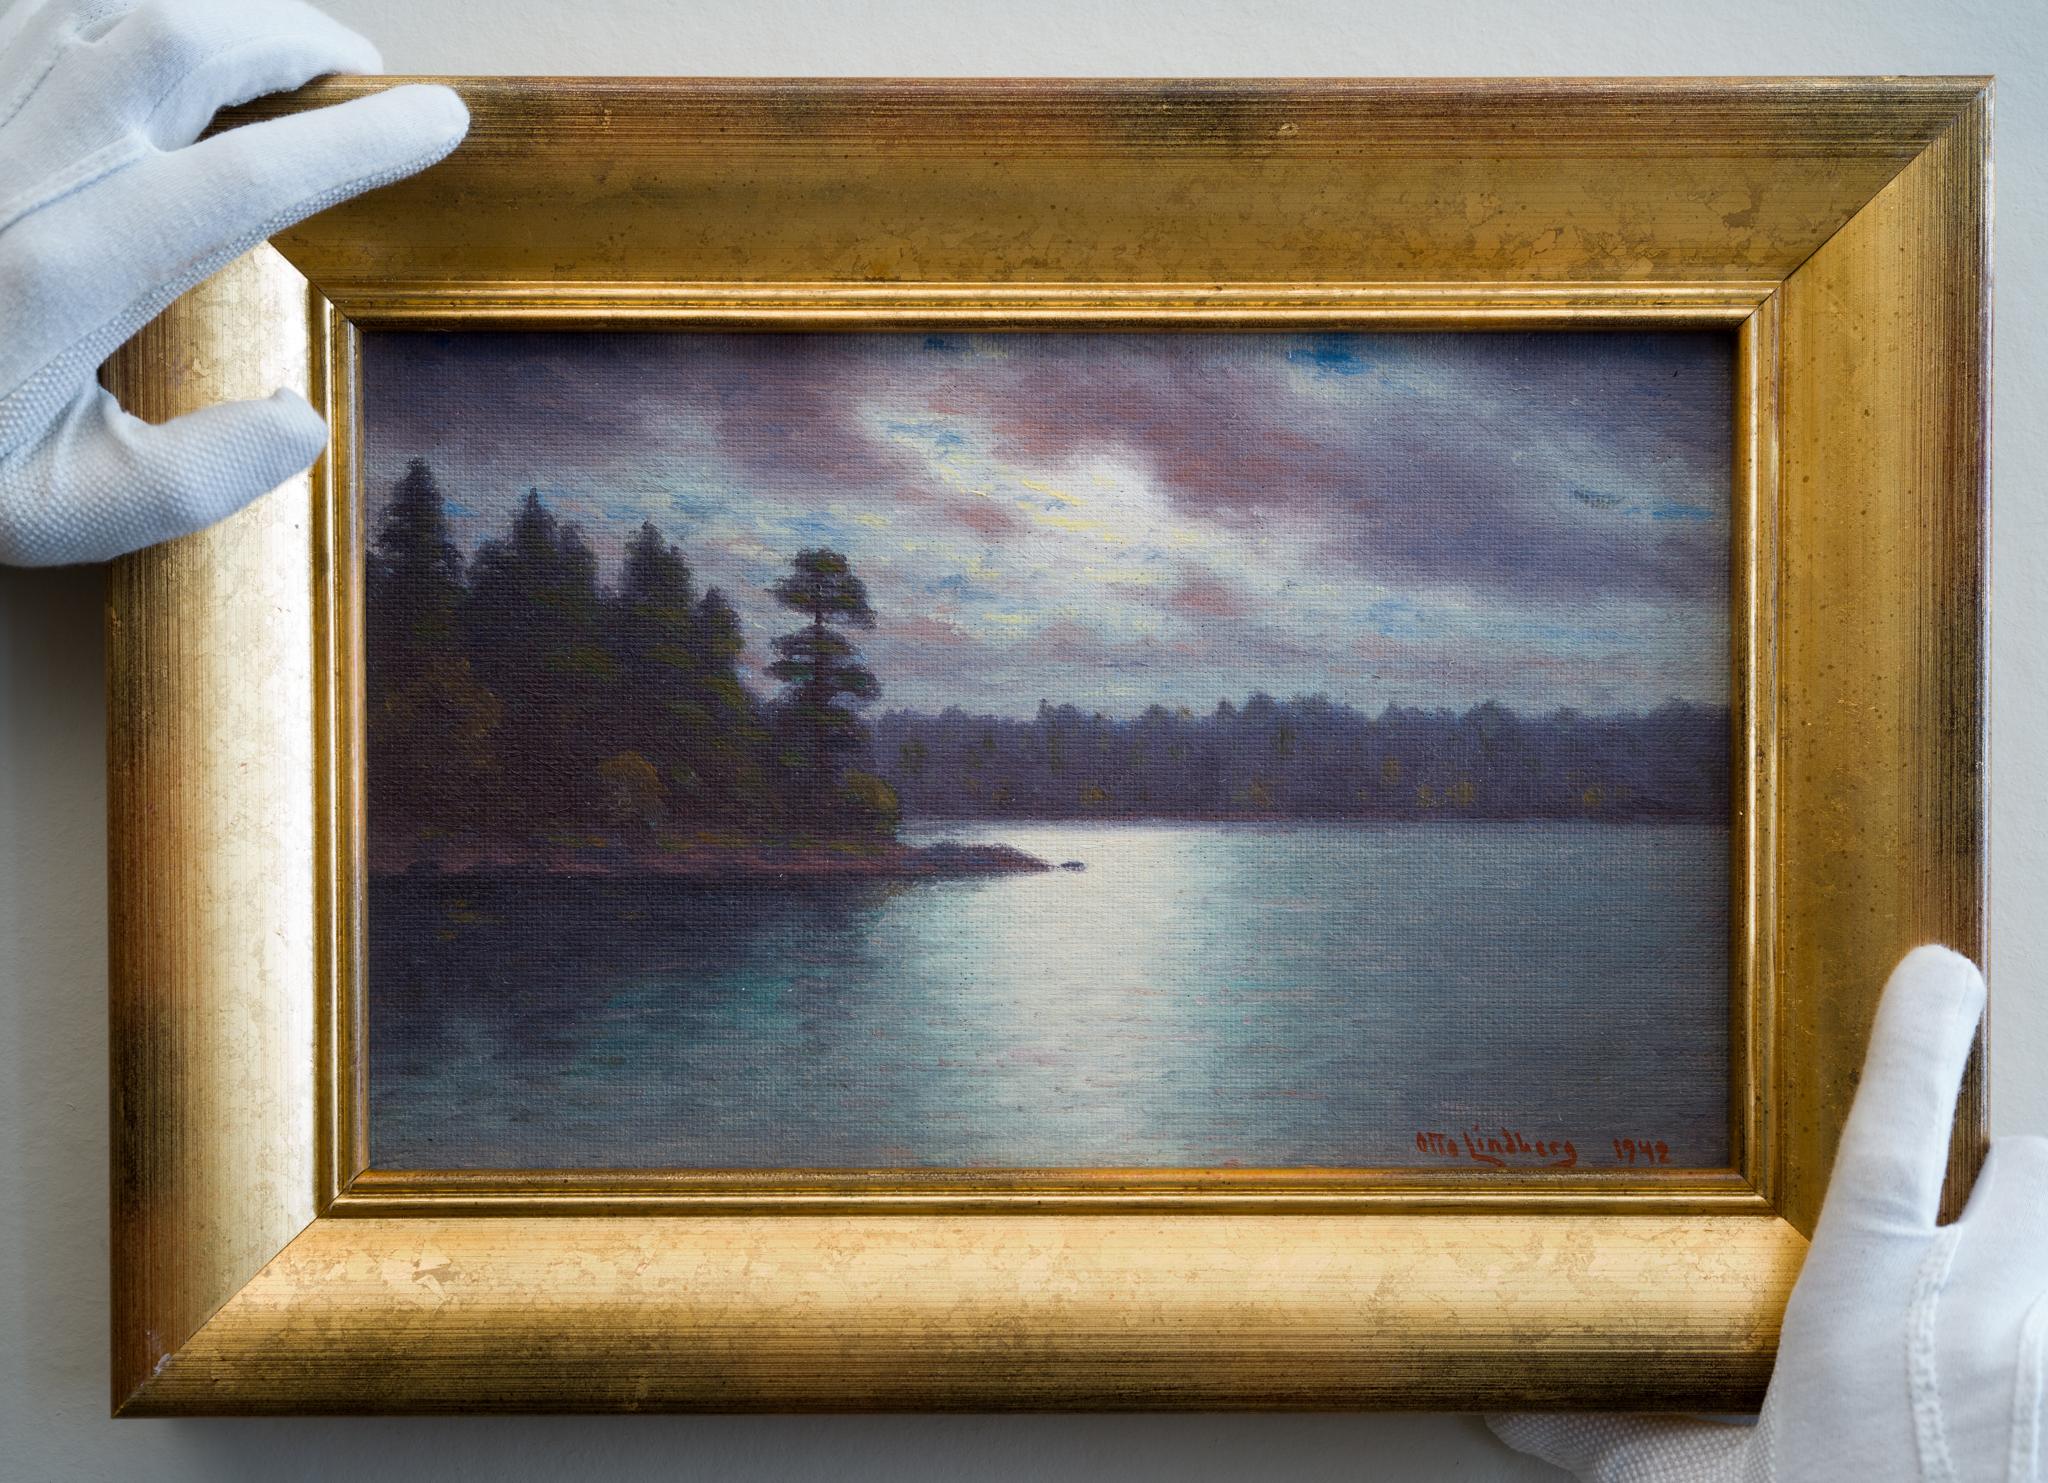 This small yet captivating painting depicts the shimmering moonlight casting its ethereal glow over a tranquil Swedish lake. To the left, an island adorned with trees emerges, while in the background, a landmass covered in foliage completes the